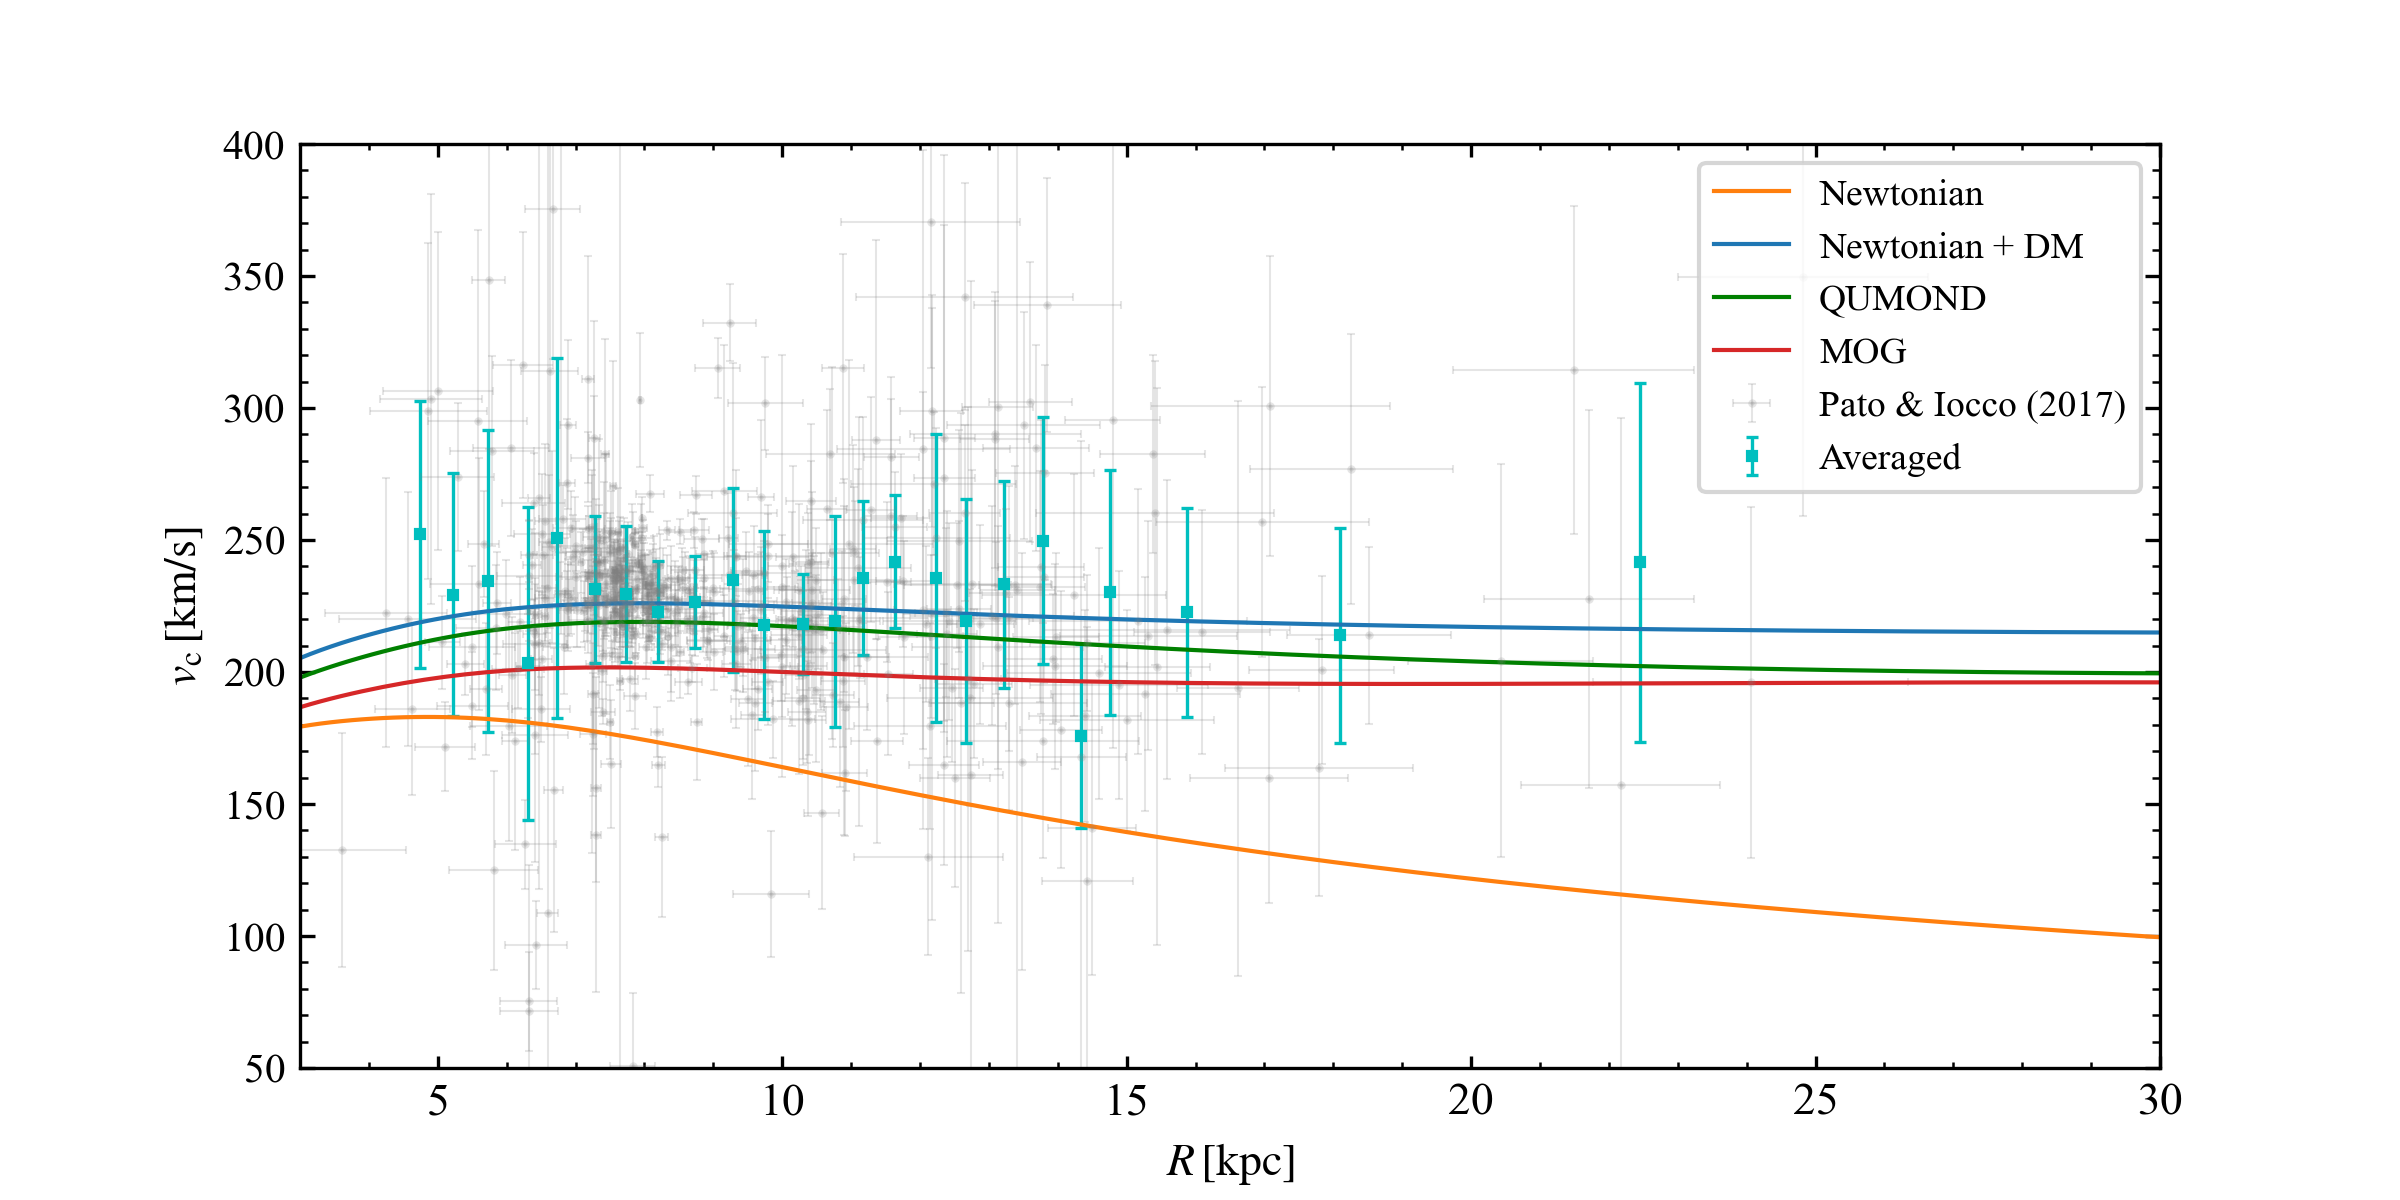 As Figure~\ref{fig:rcsrm-W21}, but for the mass model and observational data based on $R_\odot=8~{\rm kpc}$ and $v_0 = 220~\rm km\,s^{-1}$. The cyan data points with $\pm1\sigma$ error bars are our averaged rotation curve over spatial bins with $\Delta R = 0.5$ kpc (we increase the bin size at large $R$), based on the data compiled by {\tt galkin} \citep[][]{patoGalkinNewCompilation2017}. The baryonic parameters are from the ``Weaker $R_0$ prior'' mass model of \citet{mcmillan_mass_2017}.